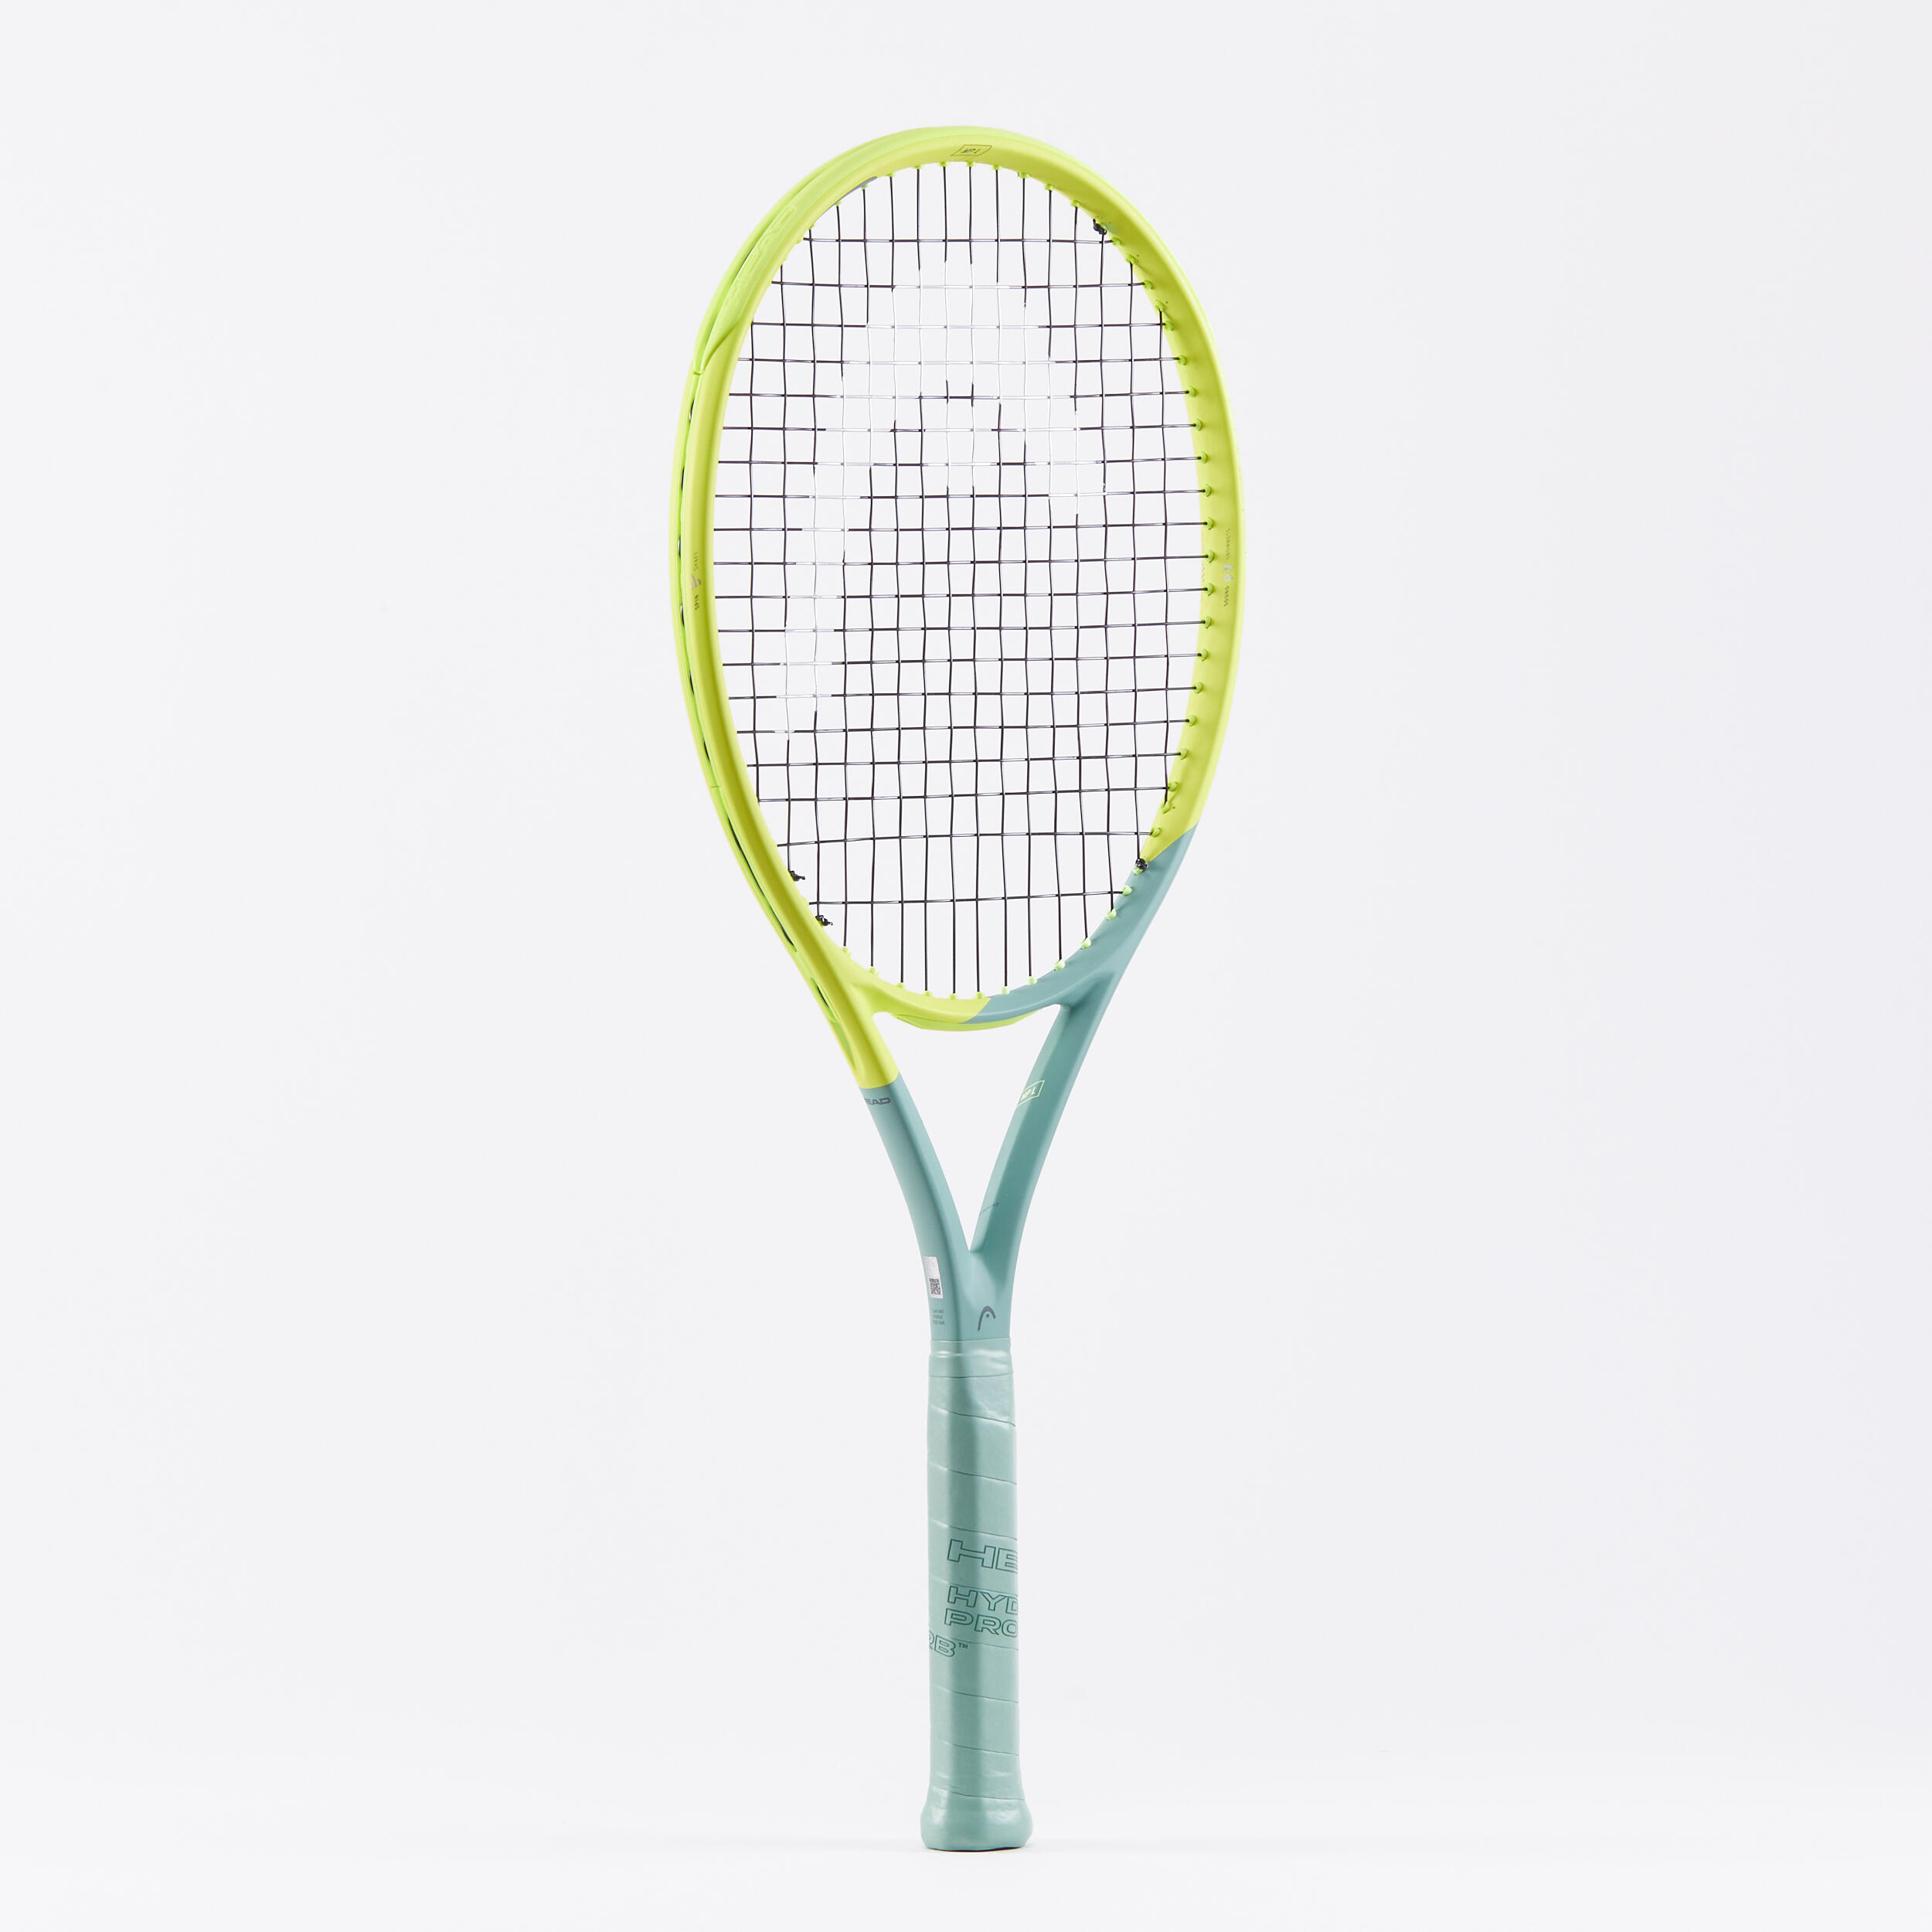 Adult Tennis Racket Auxetic Extreme MP Lite 285 g - Grey/Yellow 3/7